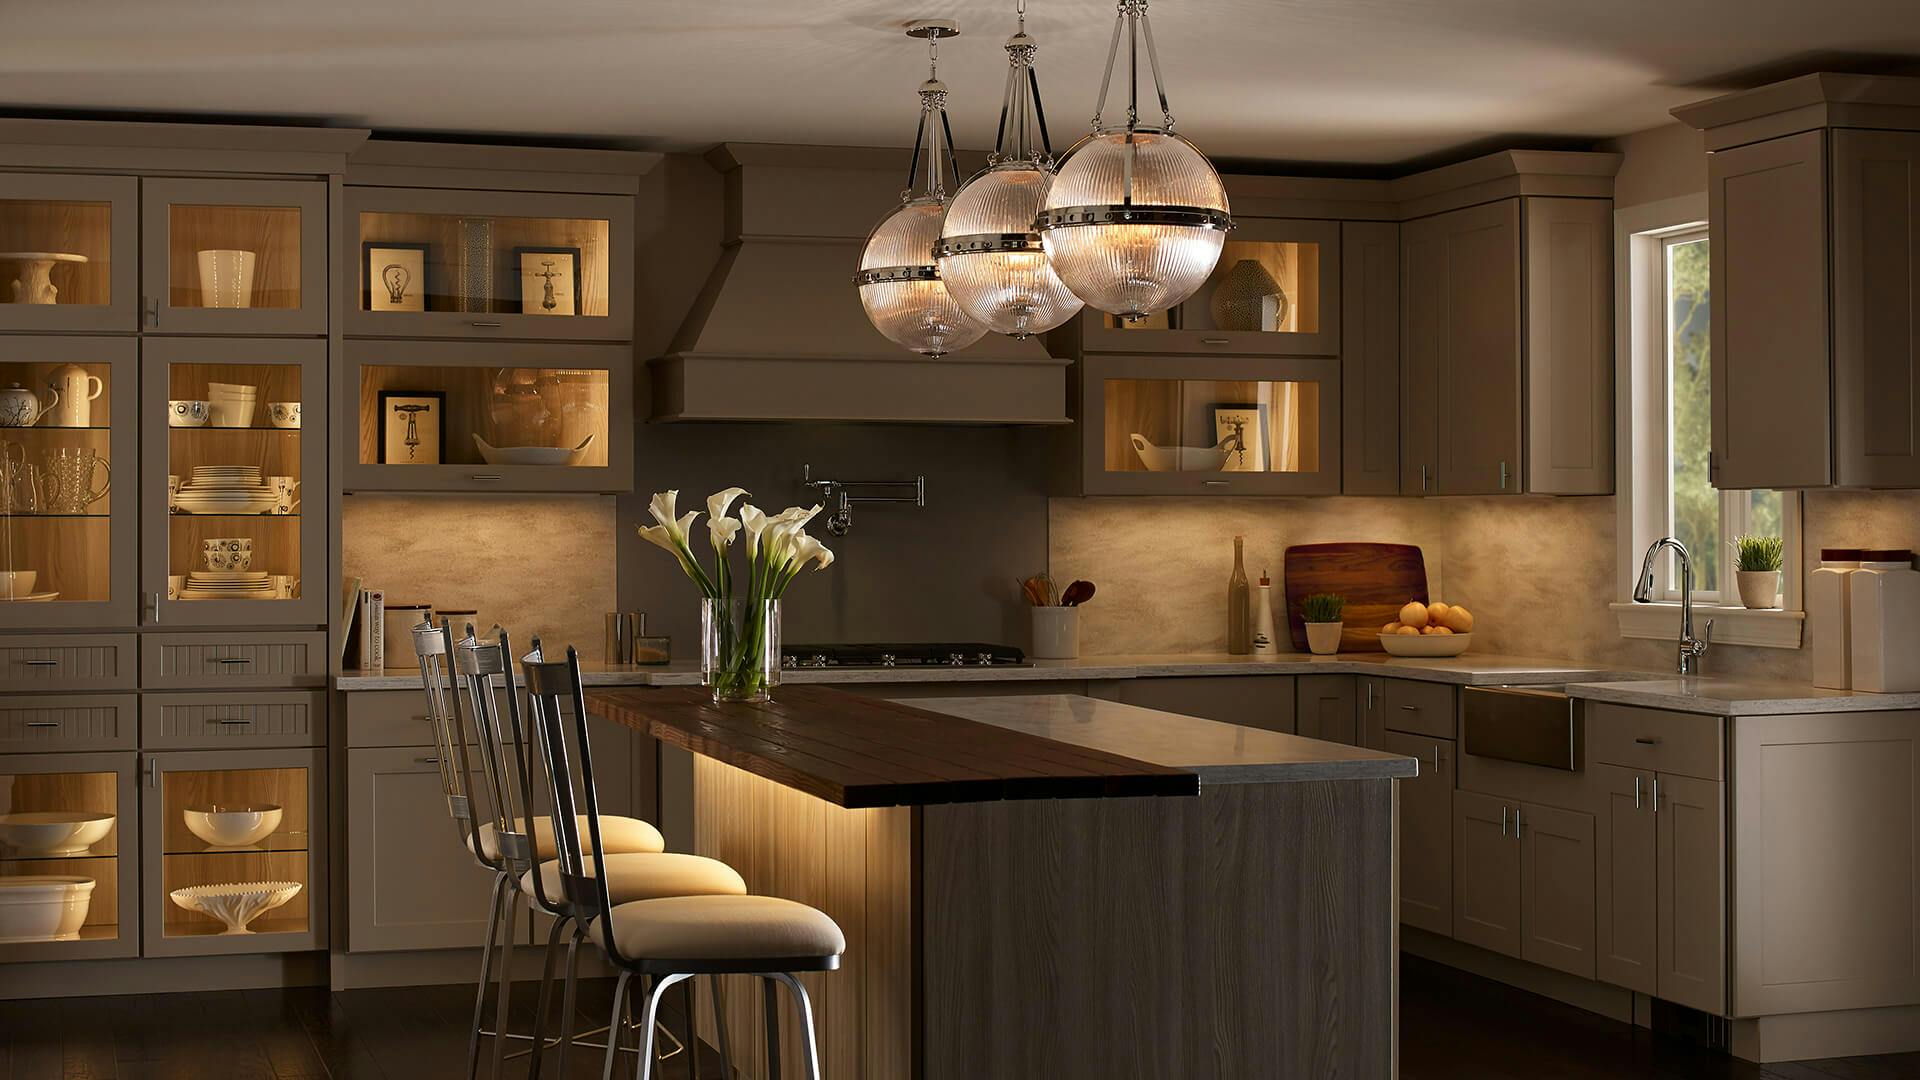 Warm, day-lit kitchen with three Aster pendants lit above the island with additional lighting under the countertop 